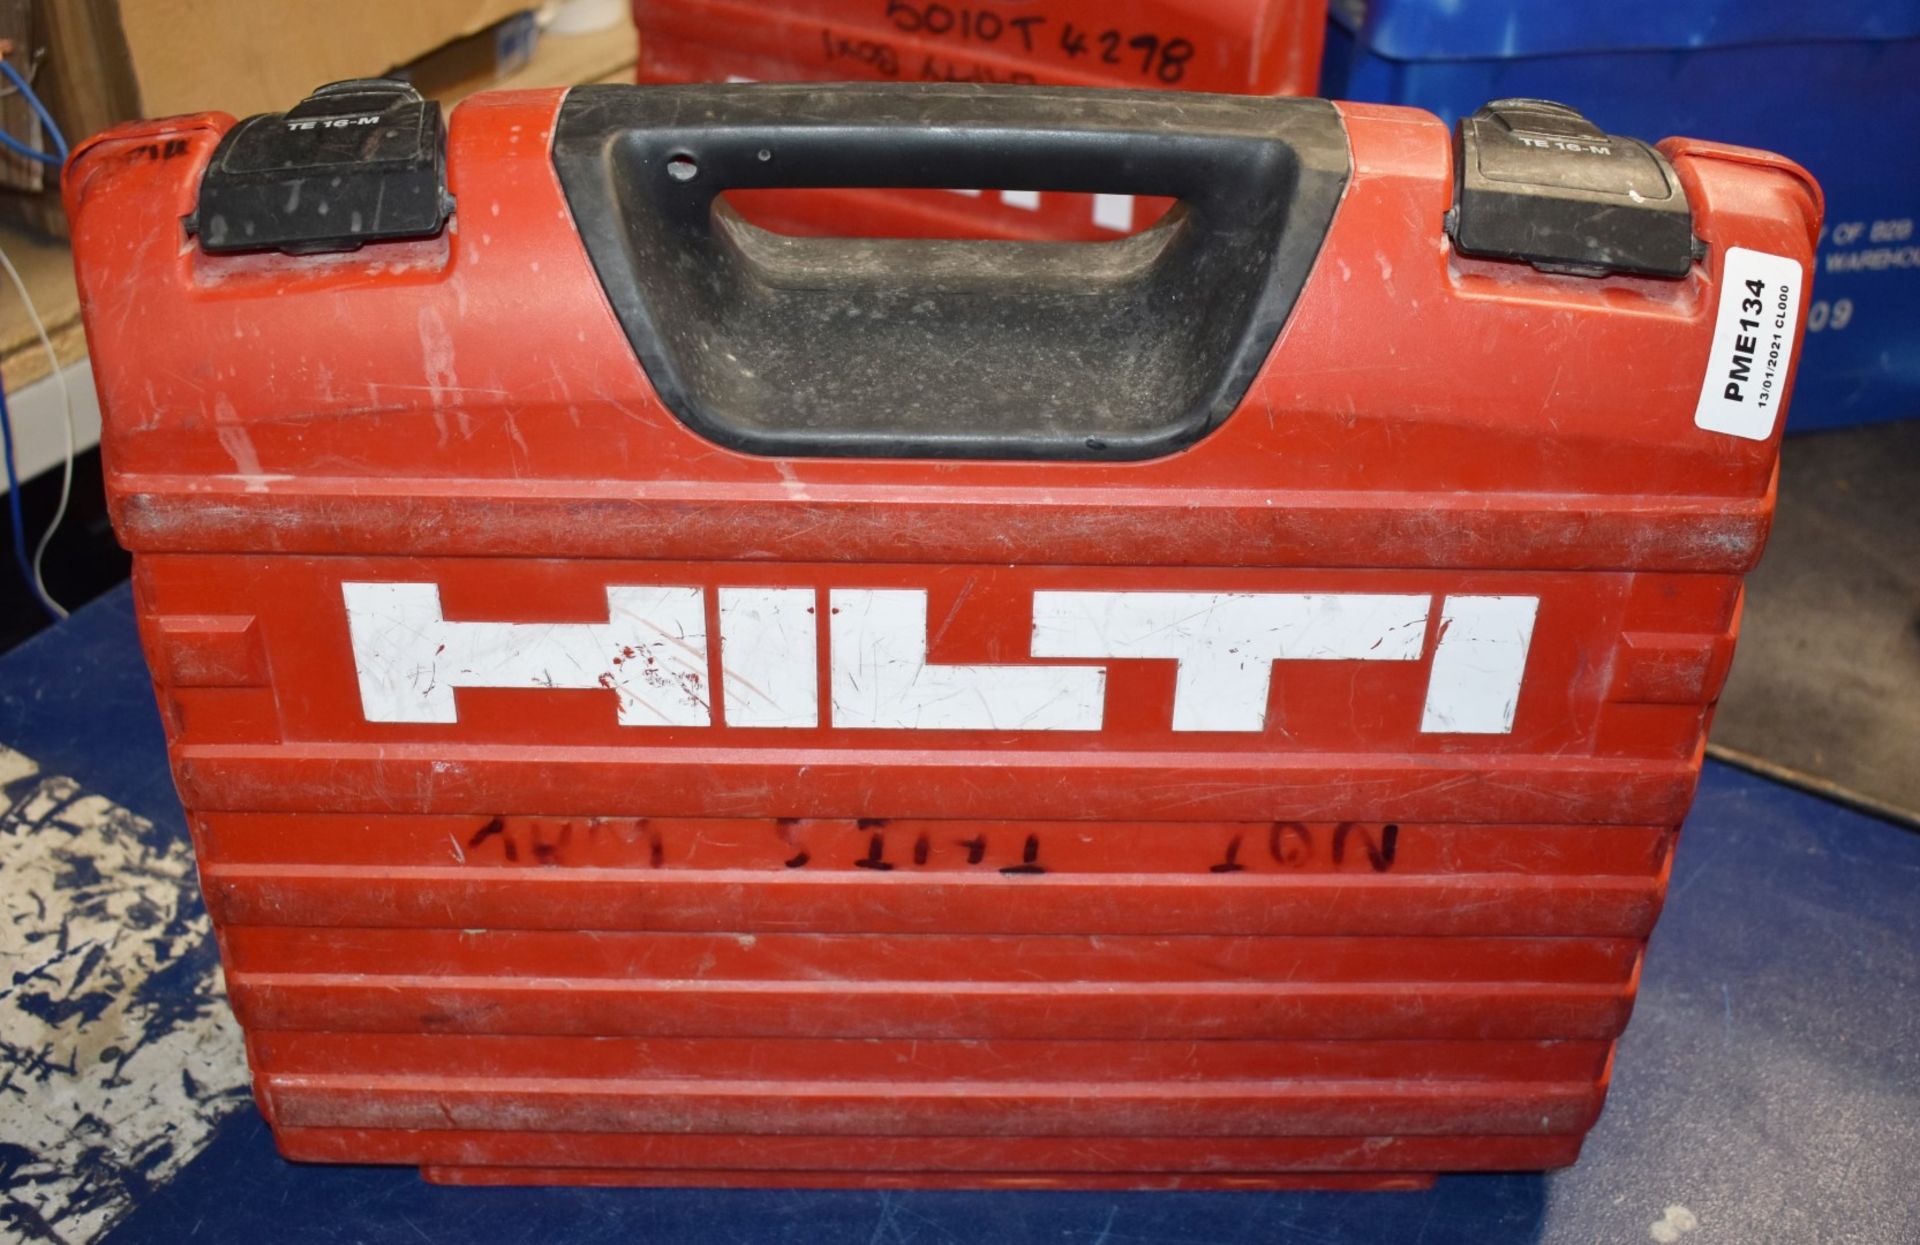 1 x Hilti TE 16M 110v Hammer Drill With Carry Case PME134 - Image 2 of 7